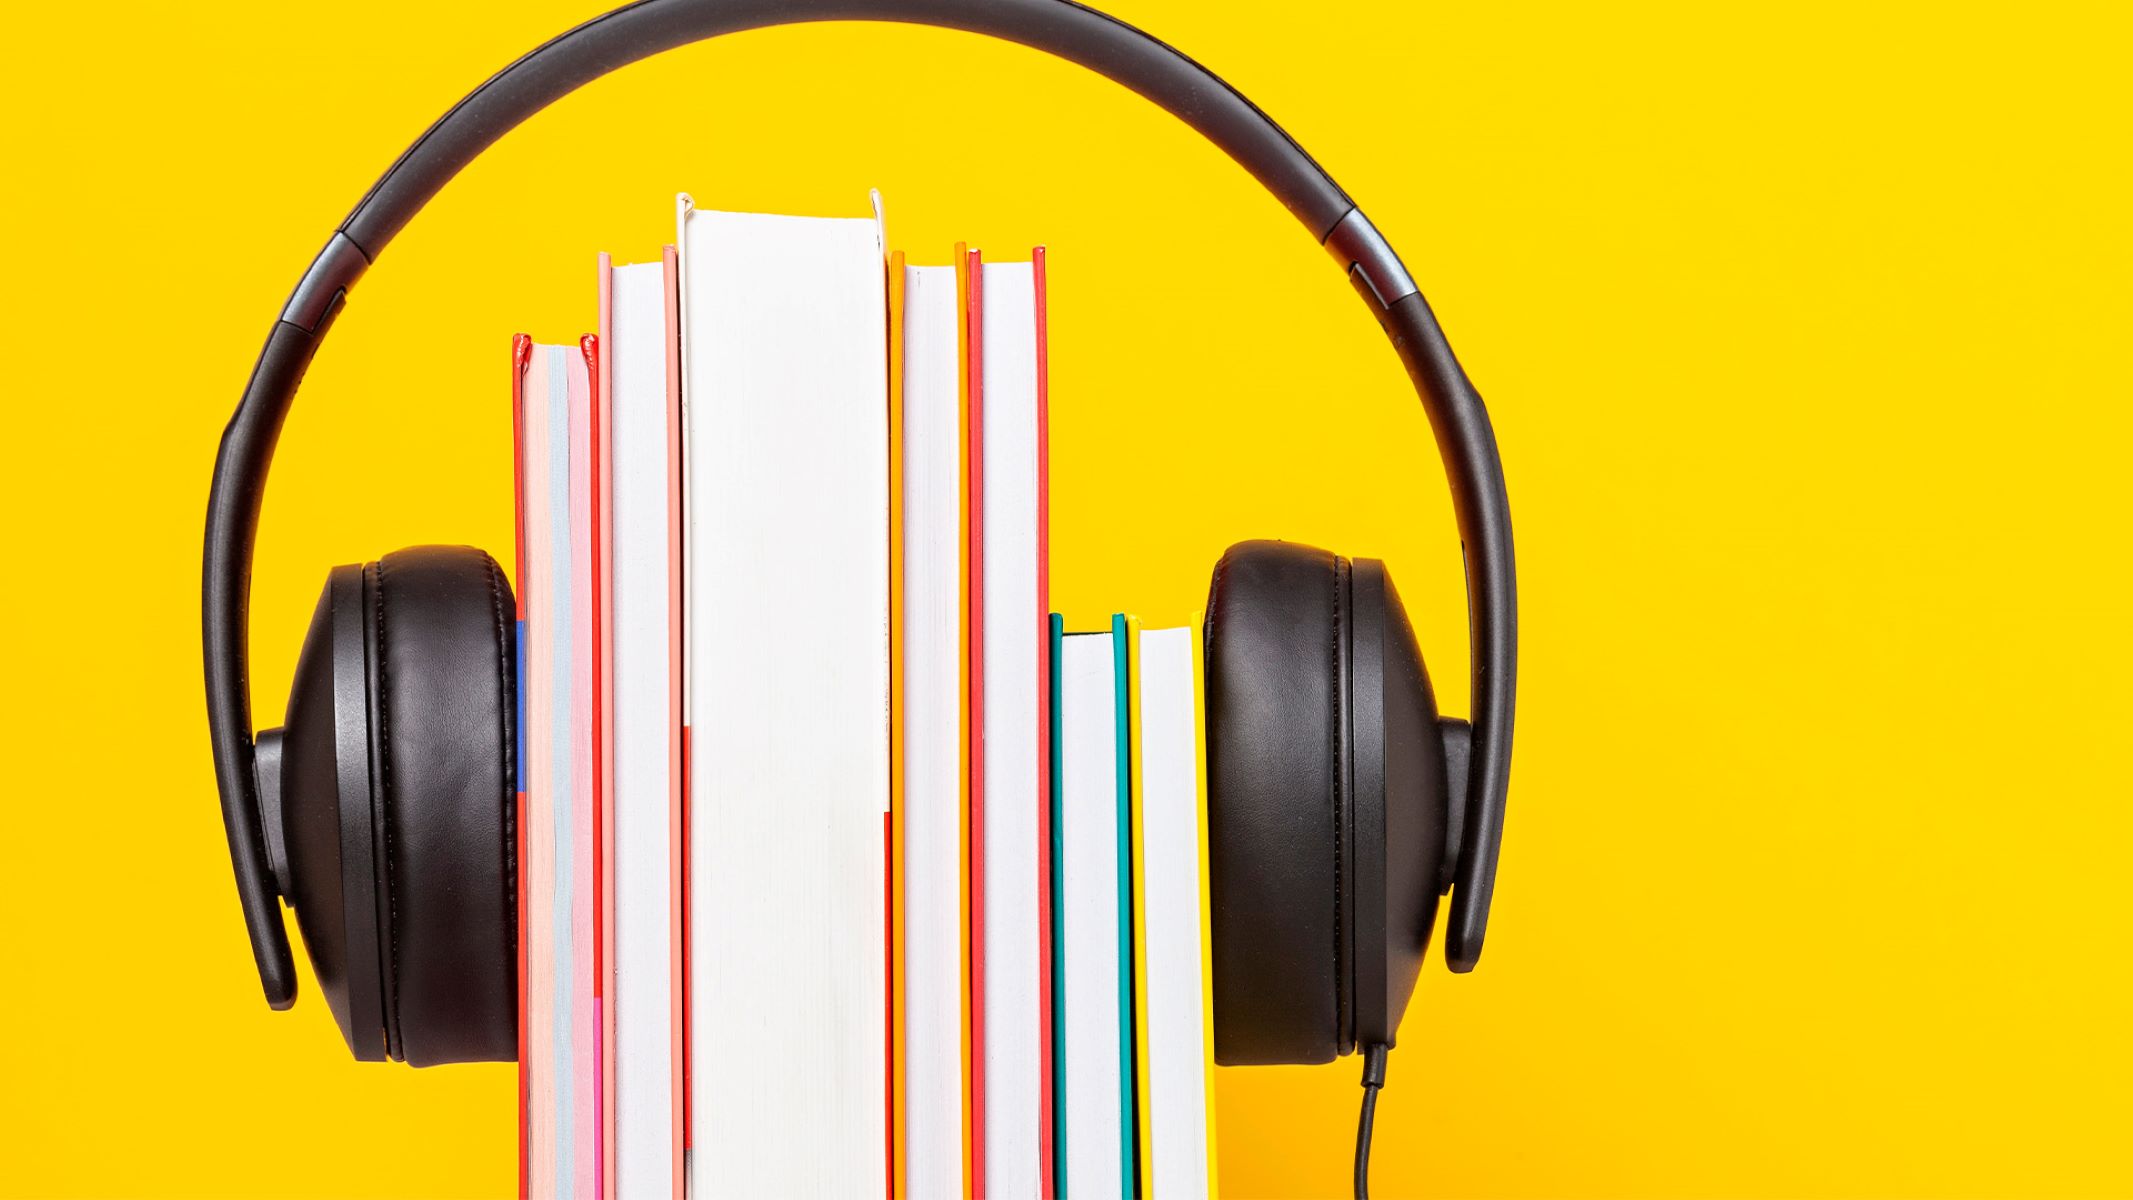 How To Buy Audiobook Without Subscription